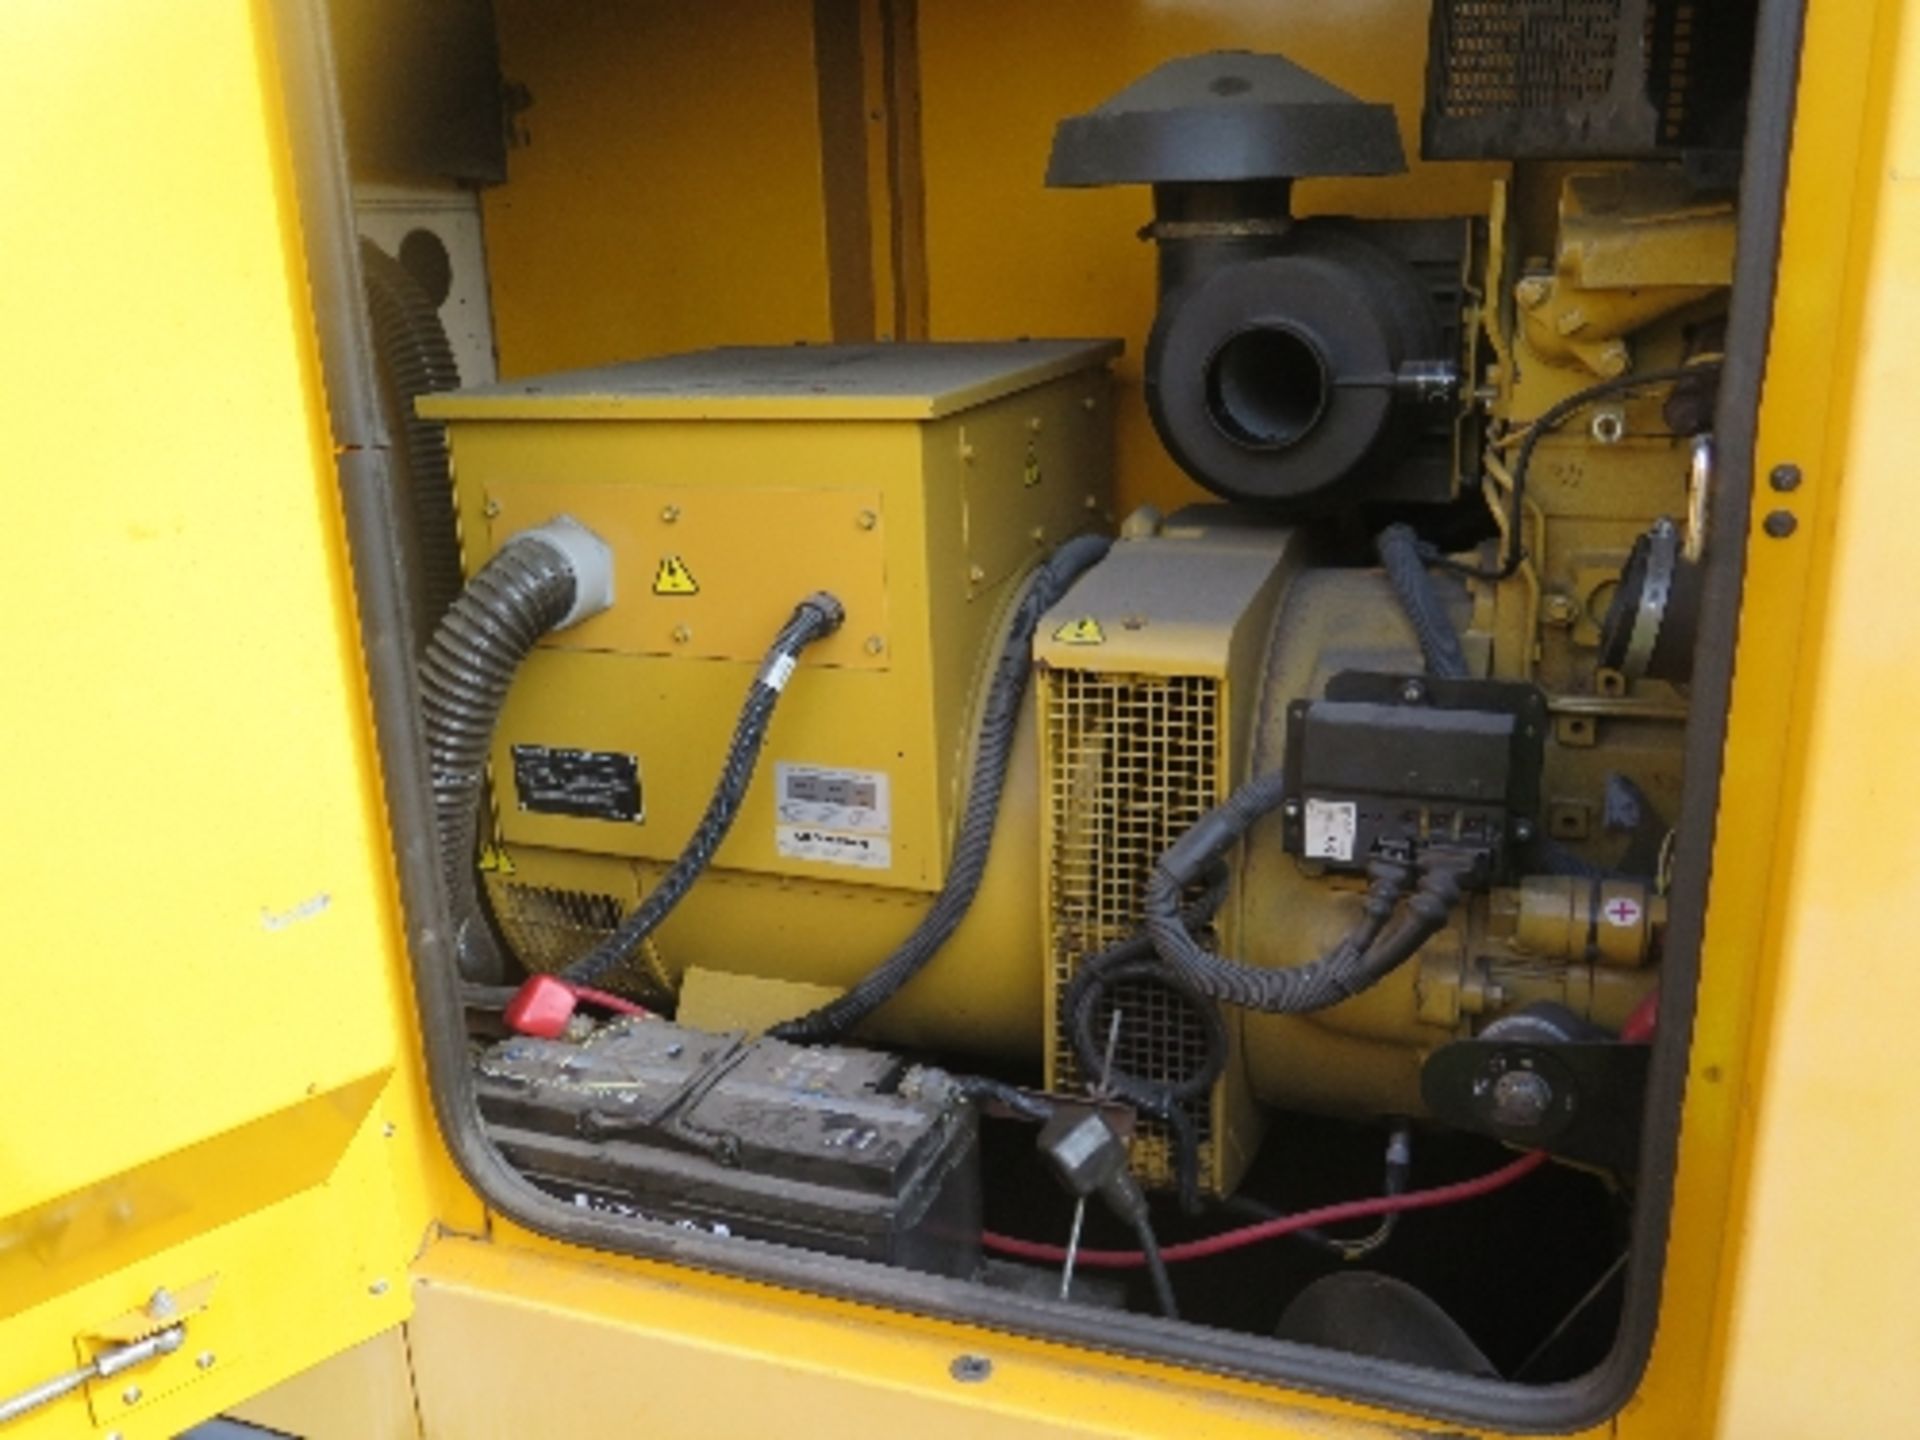 Caterpillar XQE100 trailer mounted generator 15455 hrs 145916
PERKINS - RUNS AND MAKES POWER
FAN - Image 6 of 8